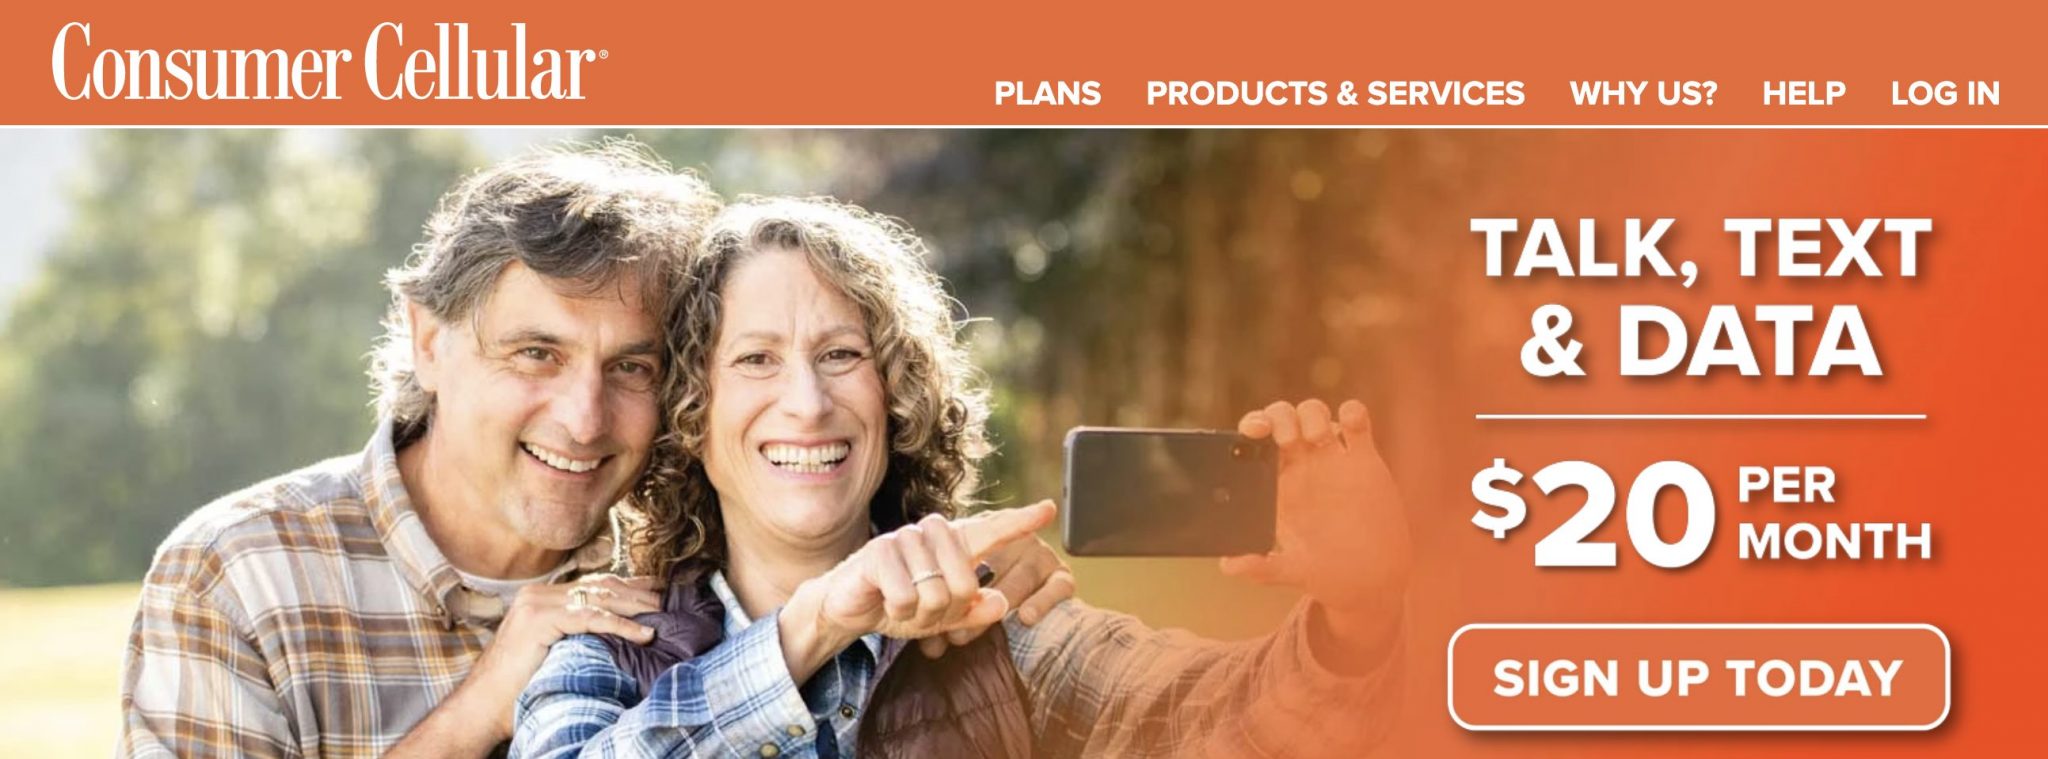 Consumer Cellular Offers Cheap, No-Nonsense Access to AT&T’s Cellular